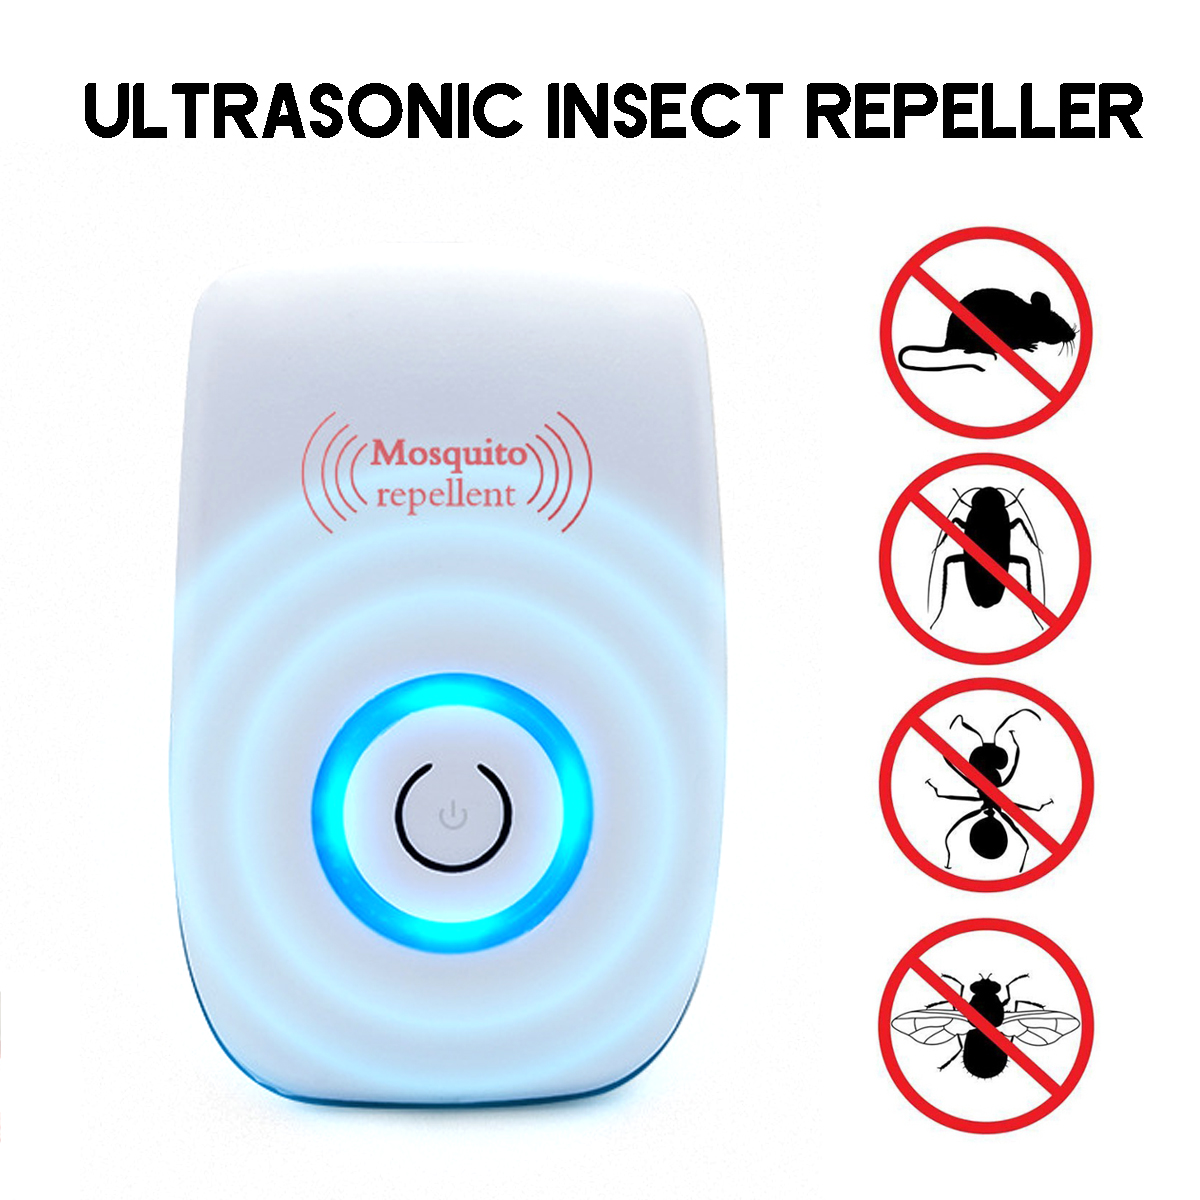 Ultrasonic-Electronic-Pests-Insect-Repeller-Anti-mouse-Mosquito-Cockroach-Rodent-Insect-Control-Kill-1636108-3